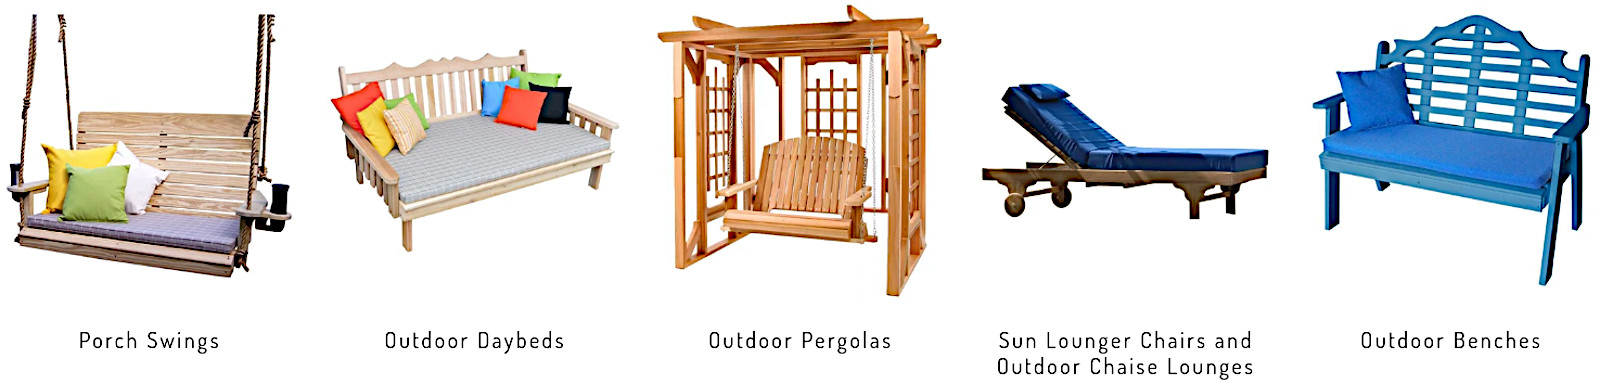 Special Price outdoor furniture